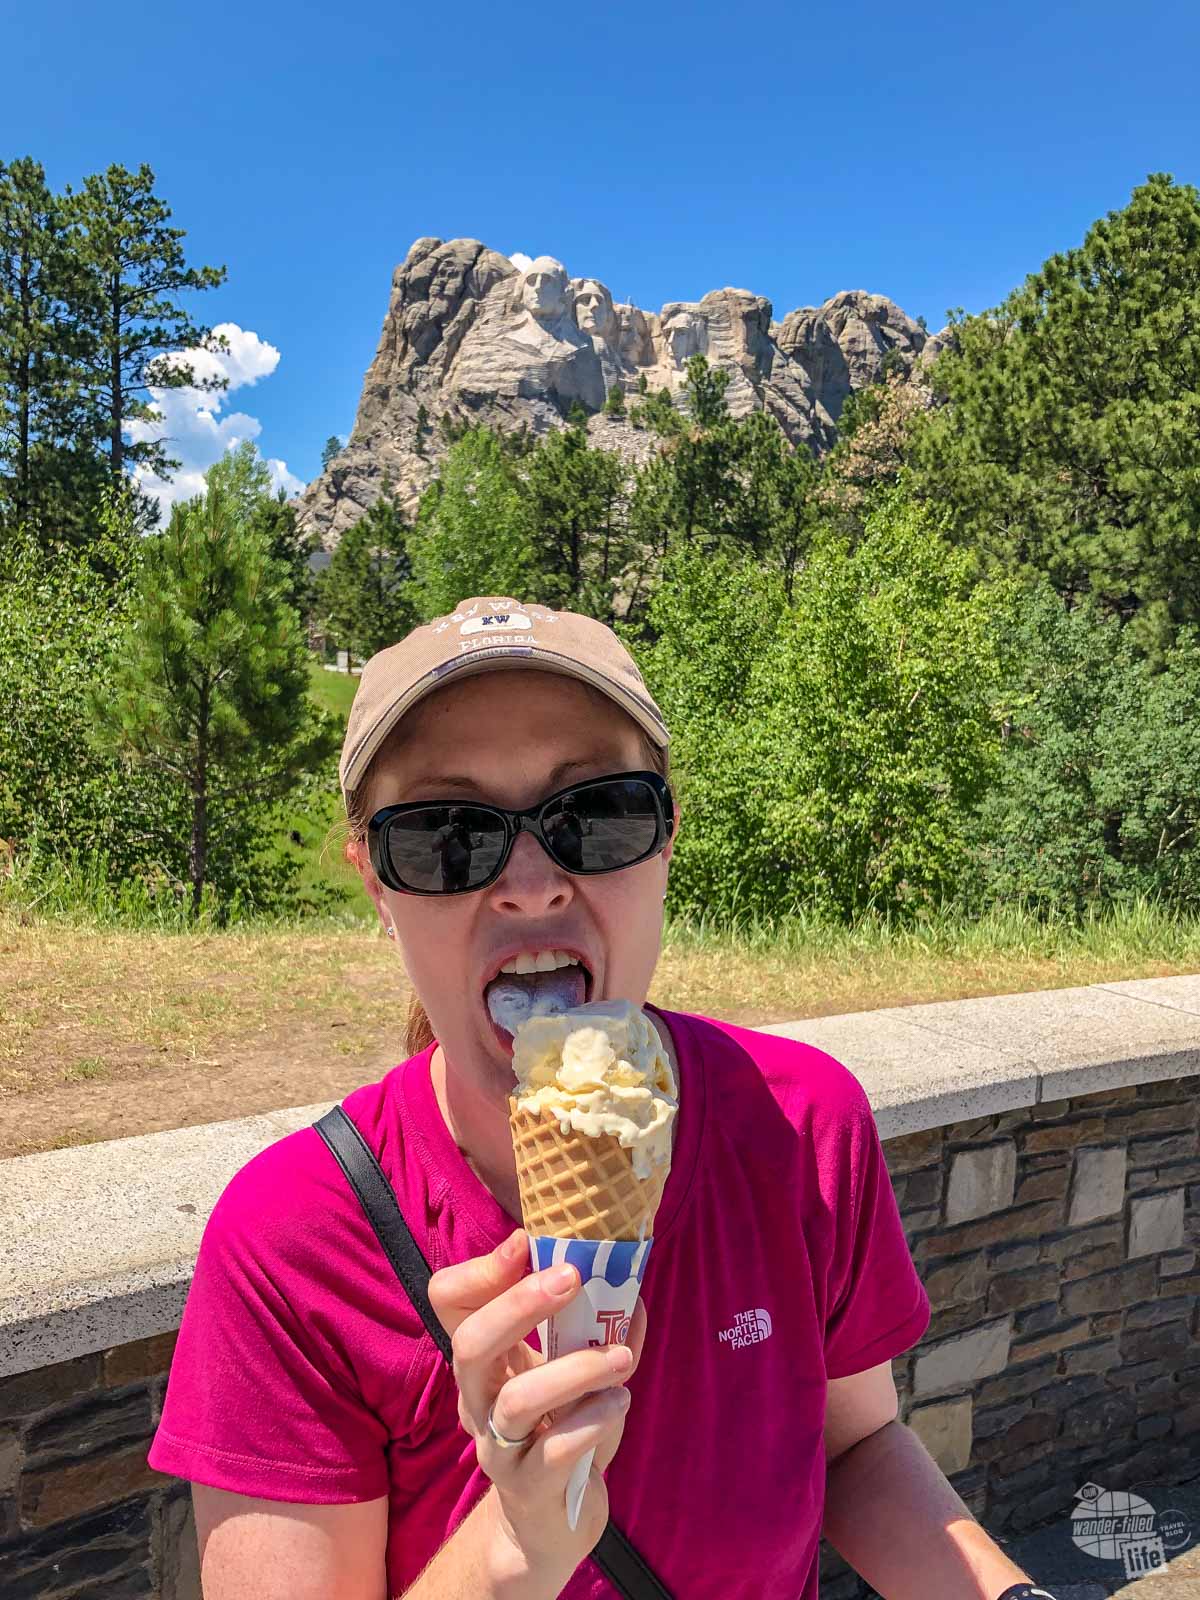 Getting a cone of Thomas Jefferson's vanilla ice cream is a tasty thing to do at Mount Rushmore.